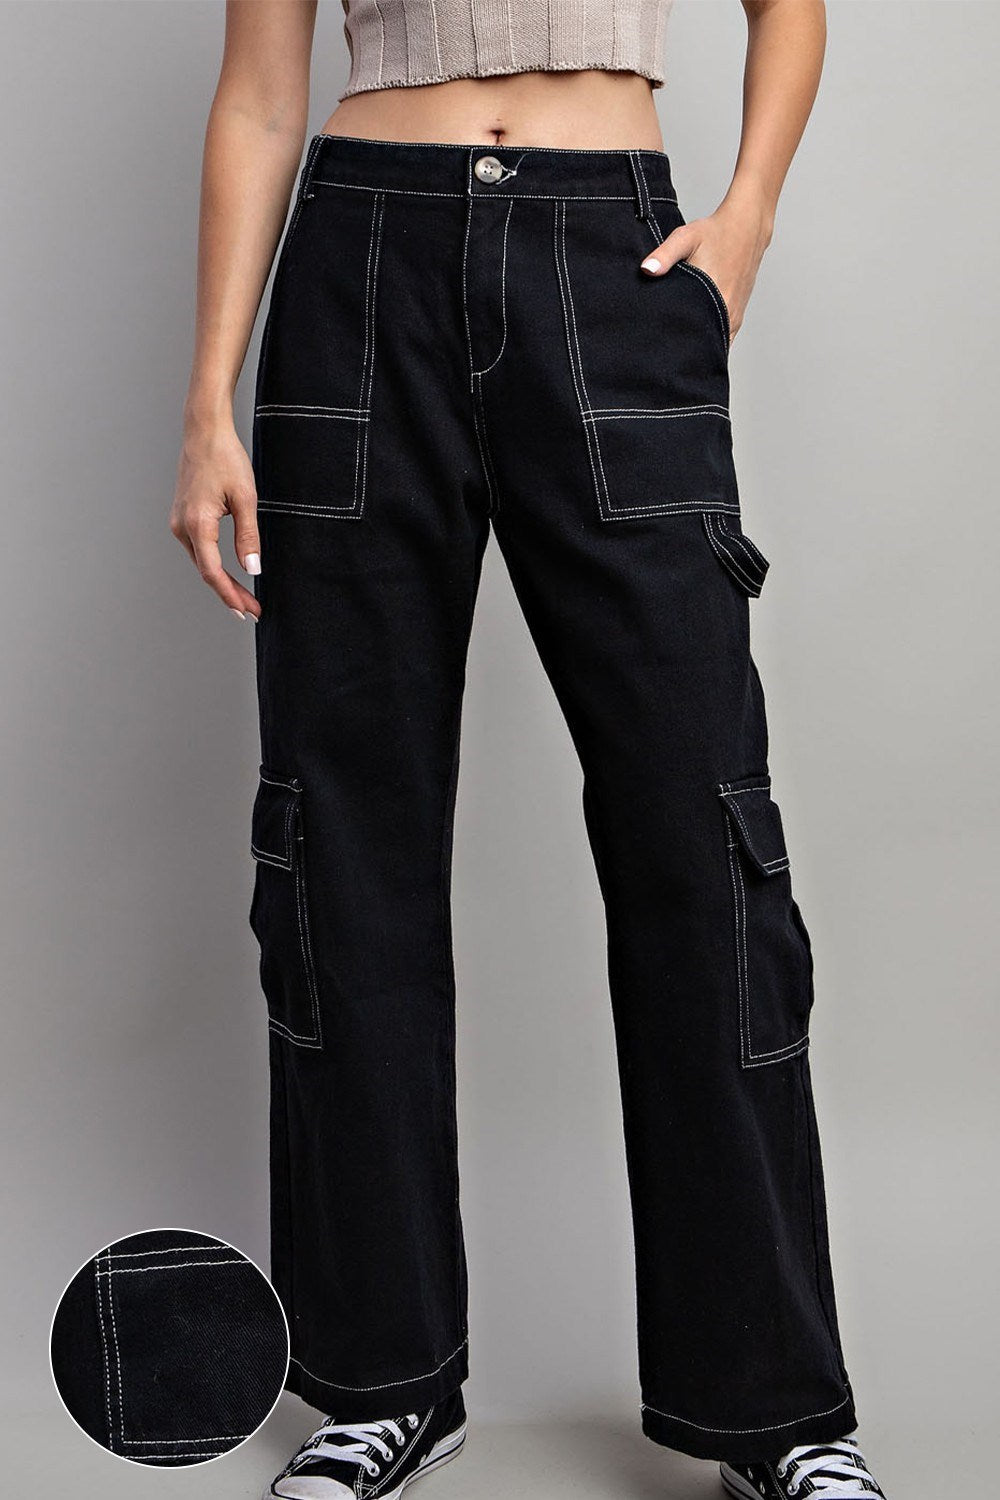 Black 2YK Inspired Cargo Pants (Small Large)